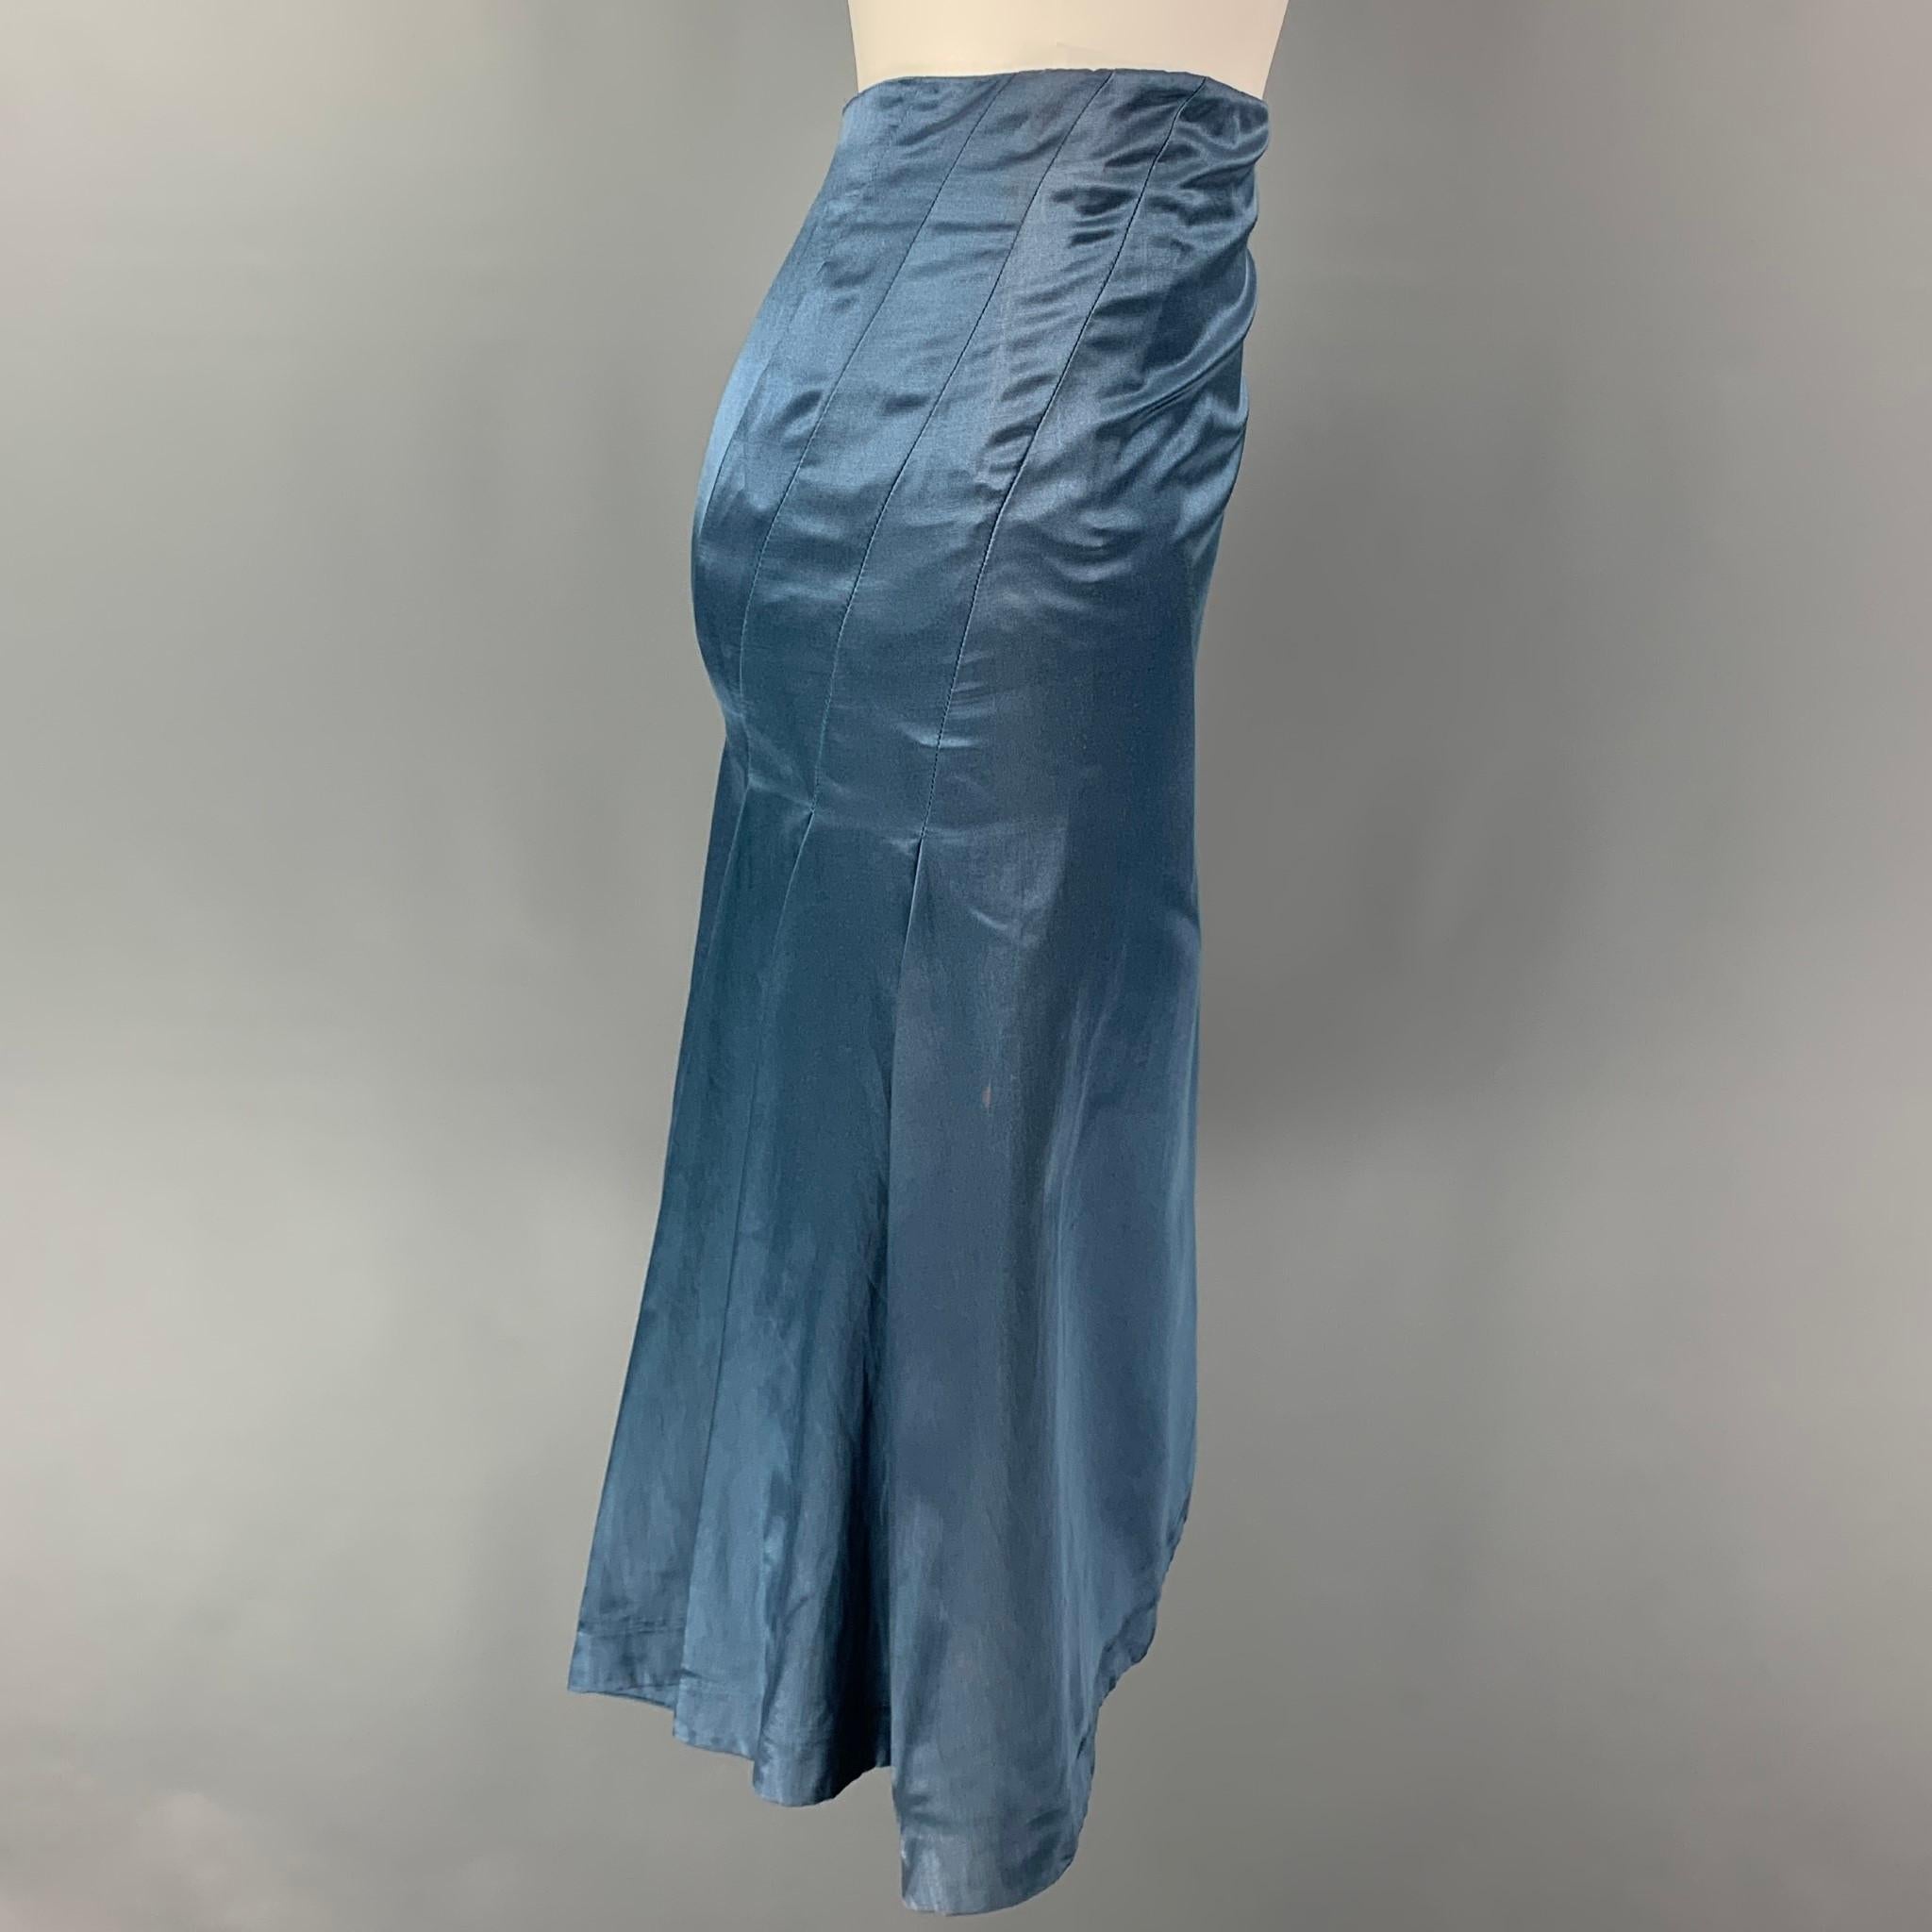 ALEXANDER McQUEEN skirt comes in a blue satin silk / cotton featuring a back pleated design and a back zip up closure. Made in Italy. 

Very Good Pre-Owned Condition. Light discoloration. As-Is.
Marked: 38

Measurements:

Waist: 28 in.
Hip: 33